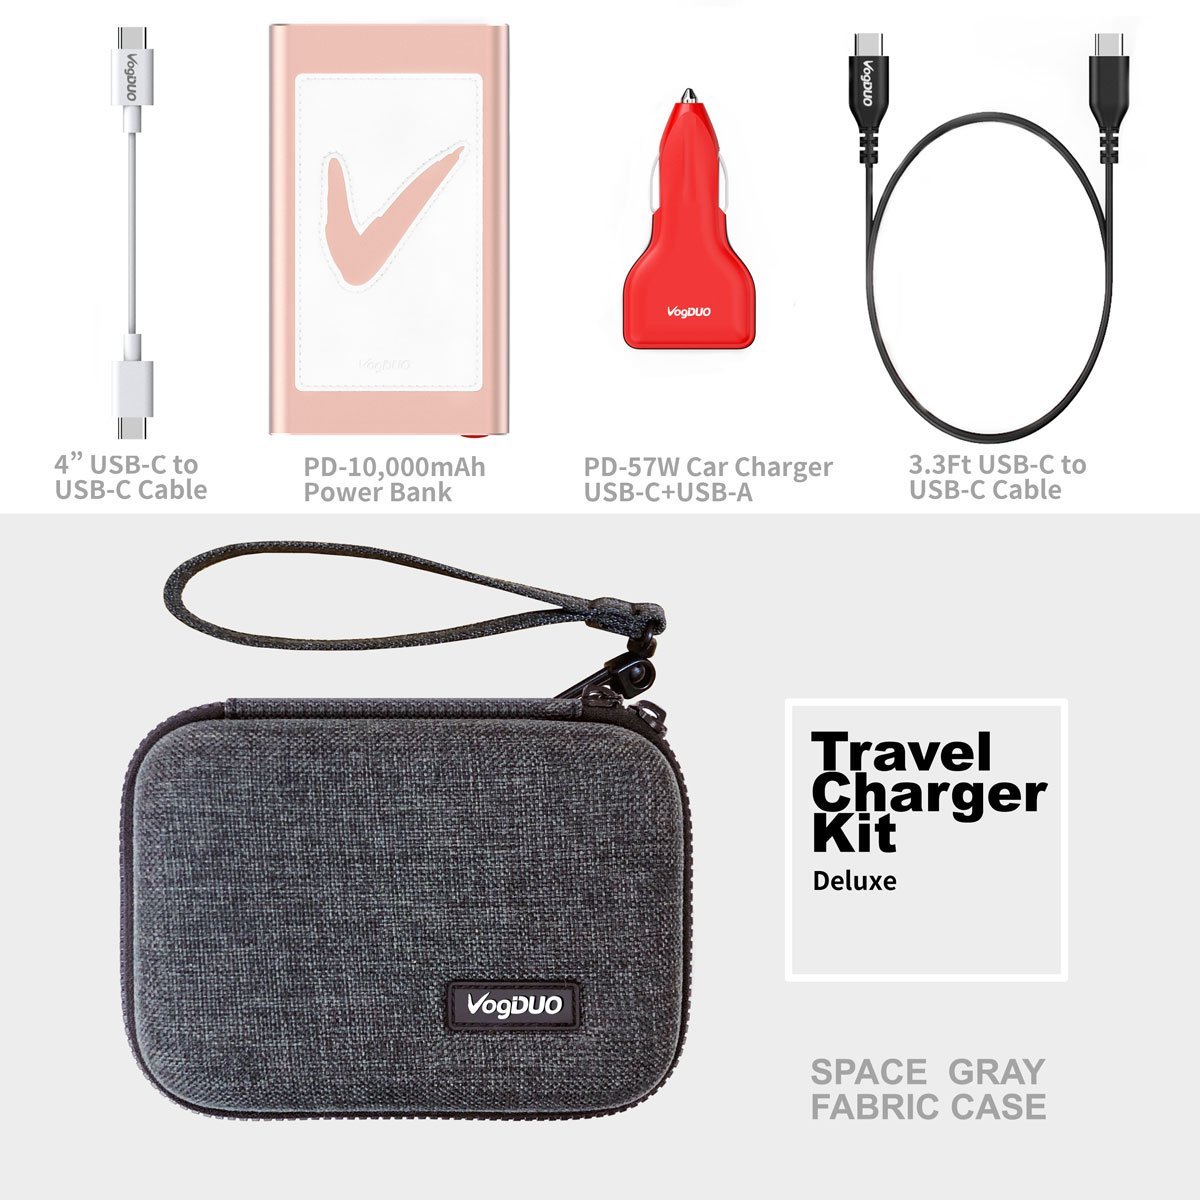 Deluxe Travel Charger Kit